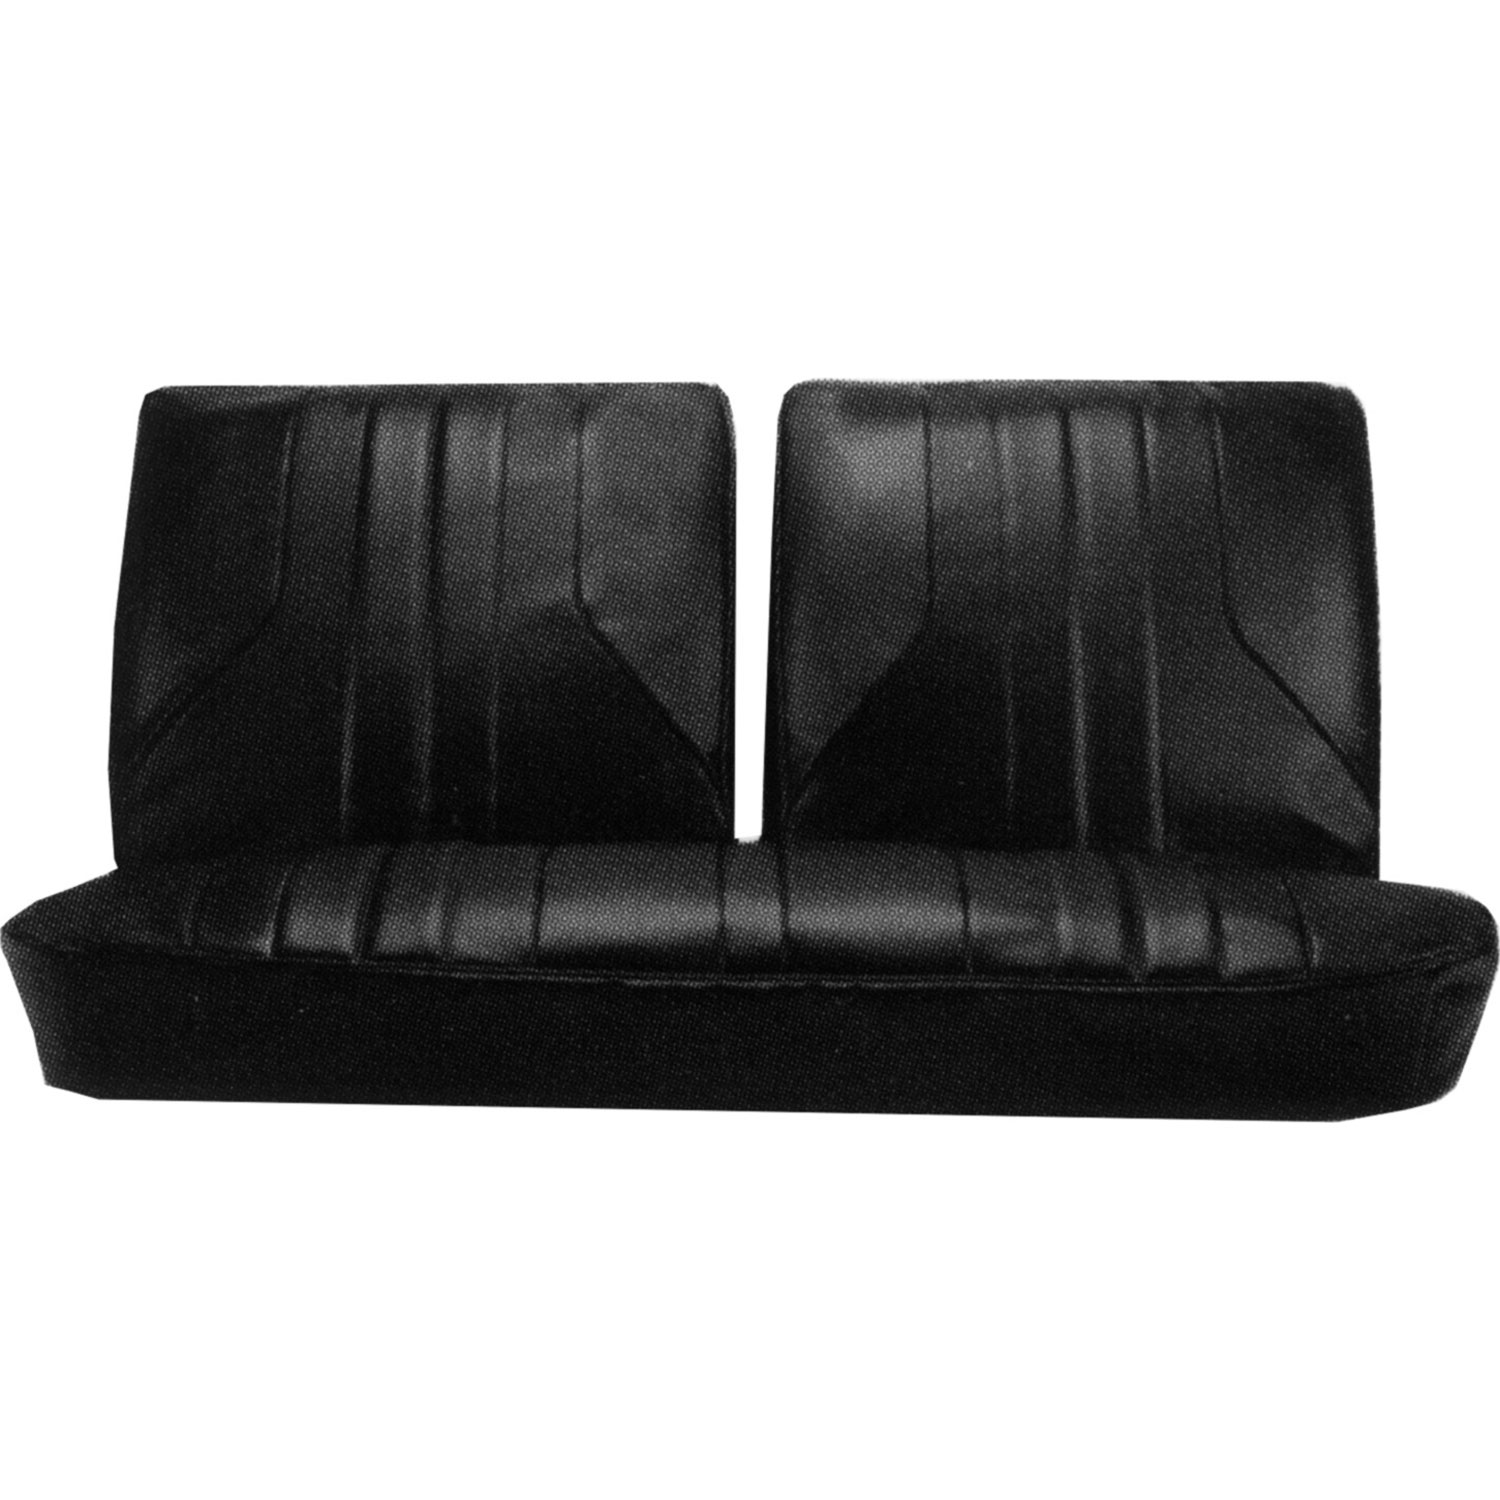 1969 Buick Skylark GS 350 Bench Front and Rear Seat Upholstery Covers